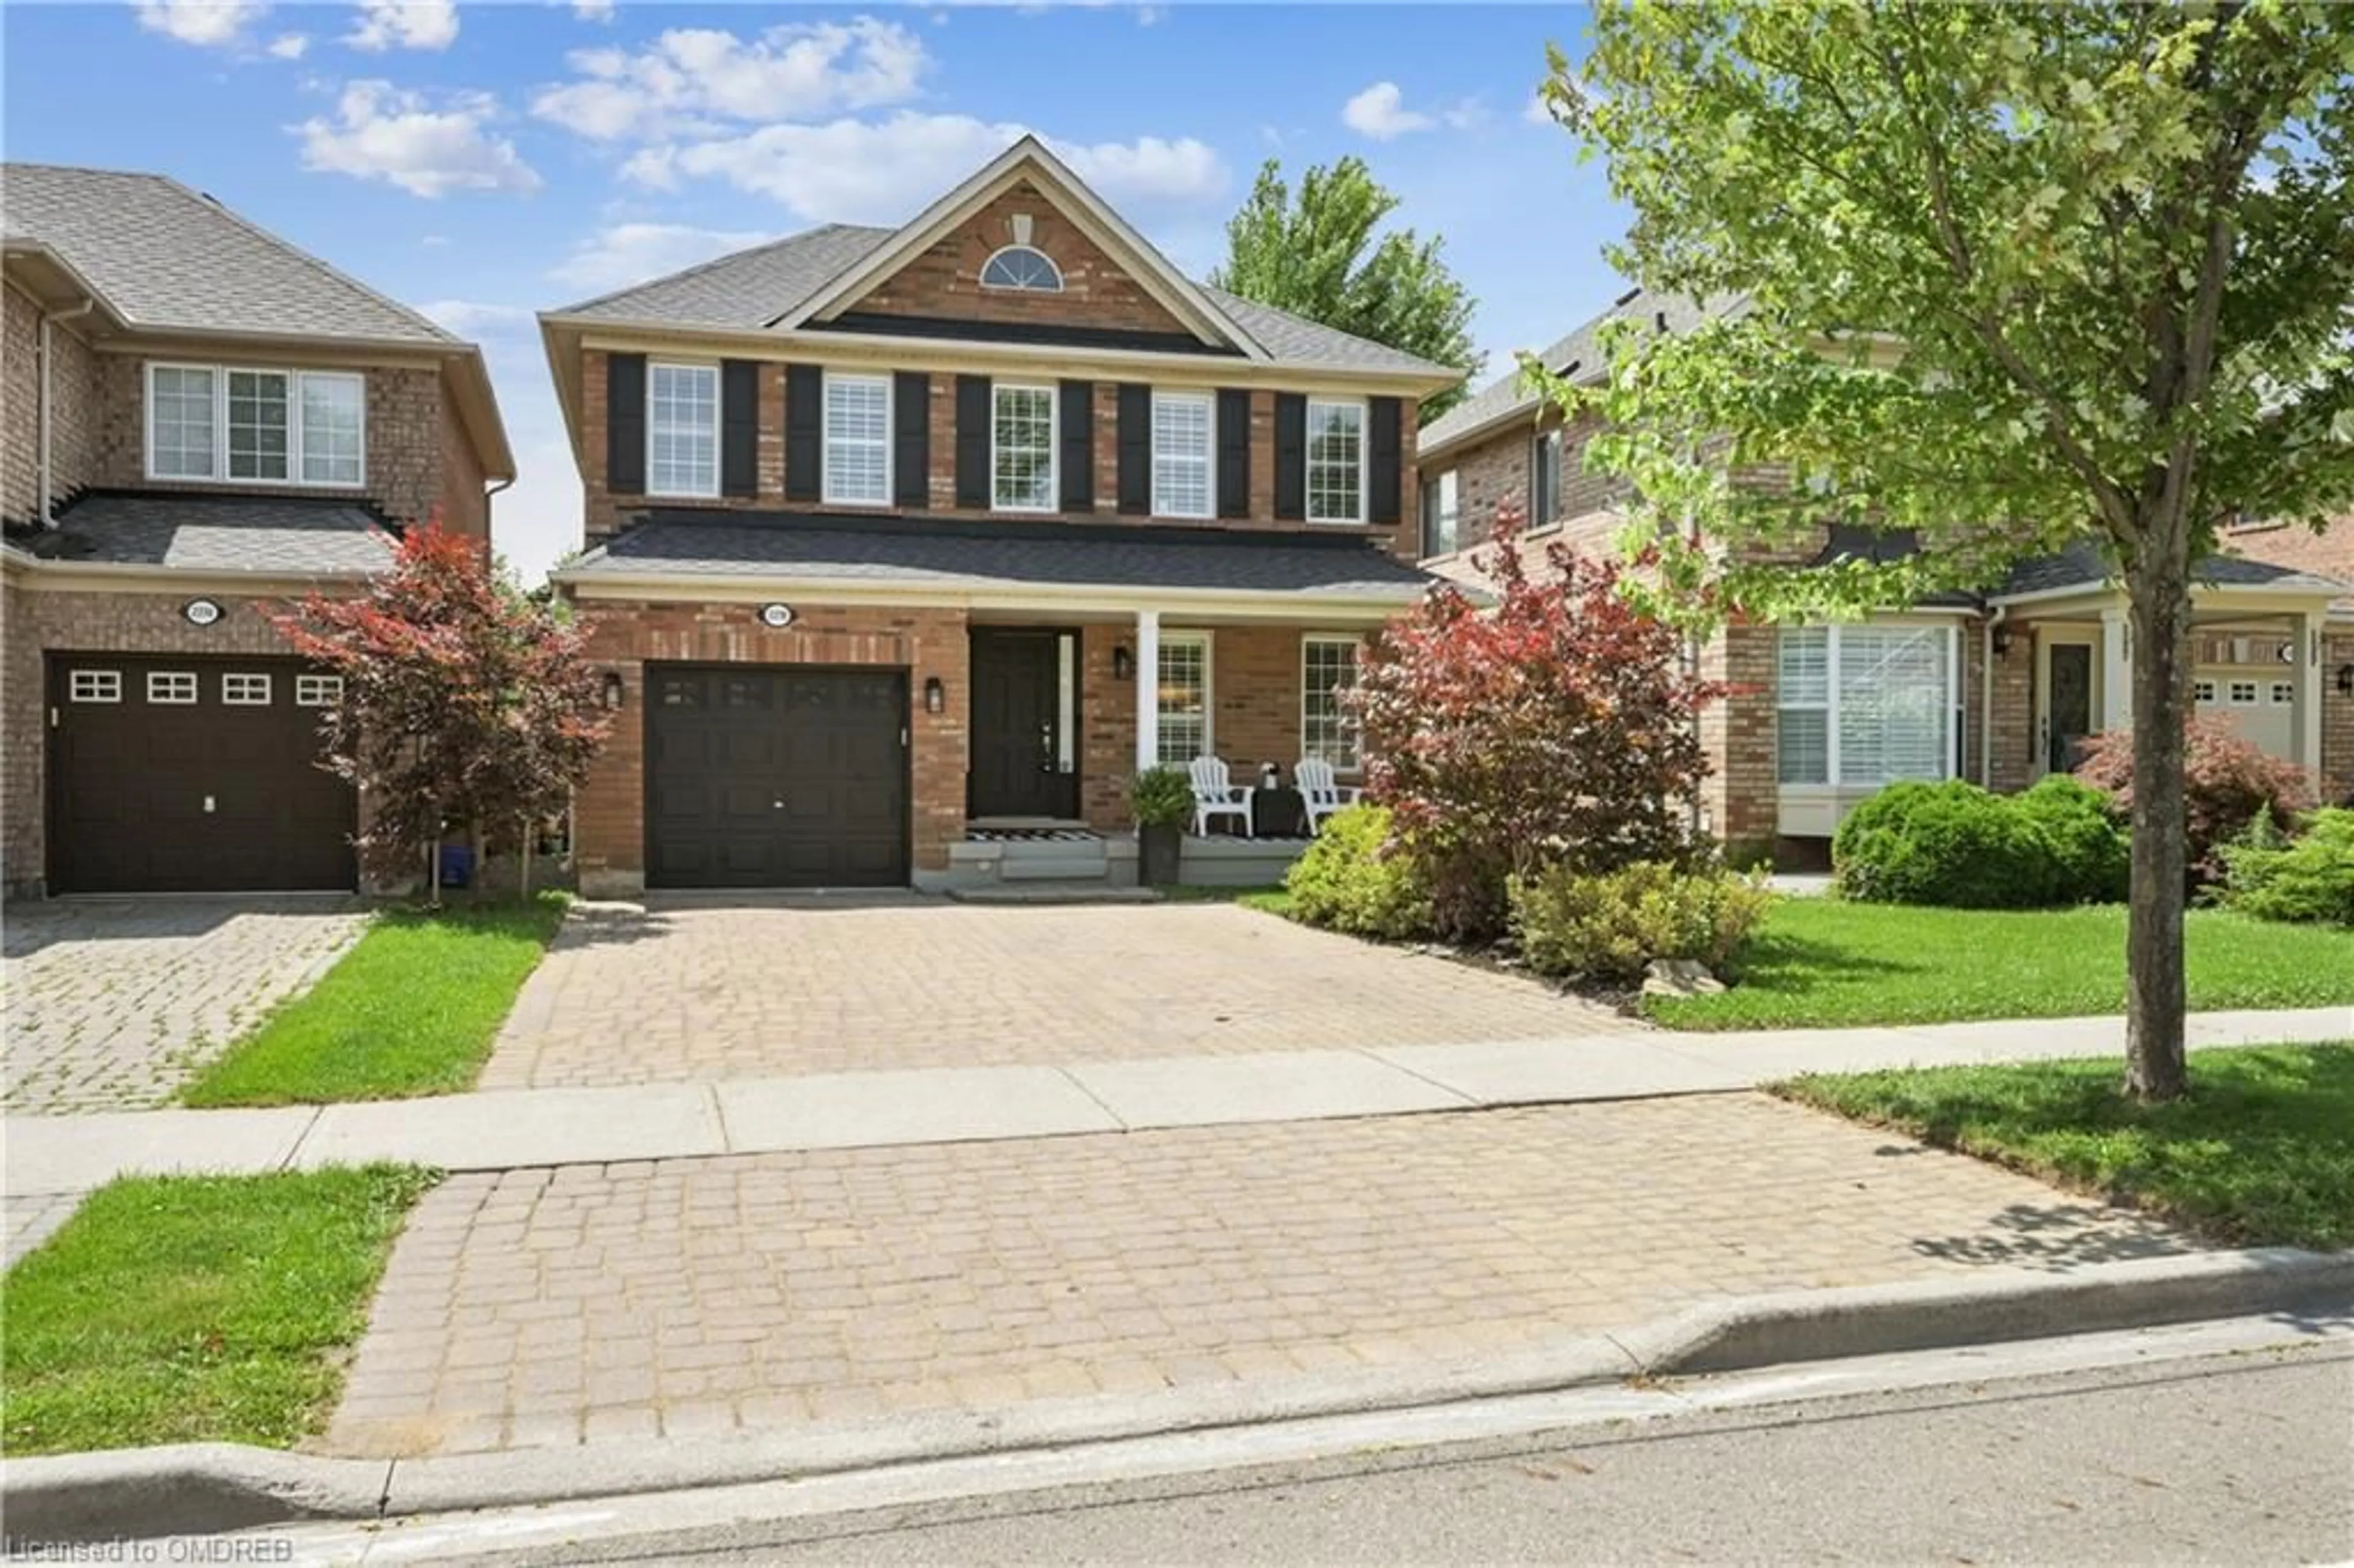 Home with brick exterior material for 2278 Grand Oak Trail, Oakville Ontario L6M 4X2